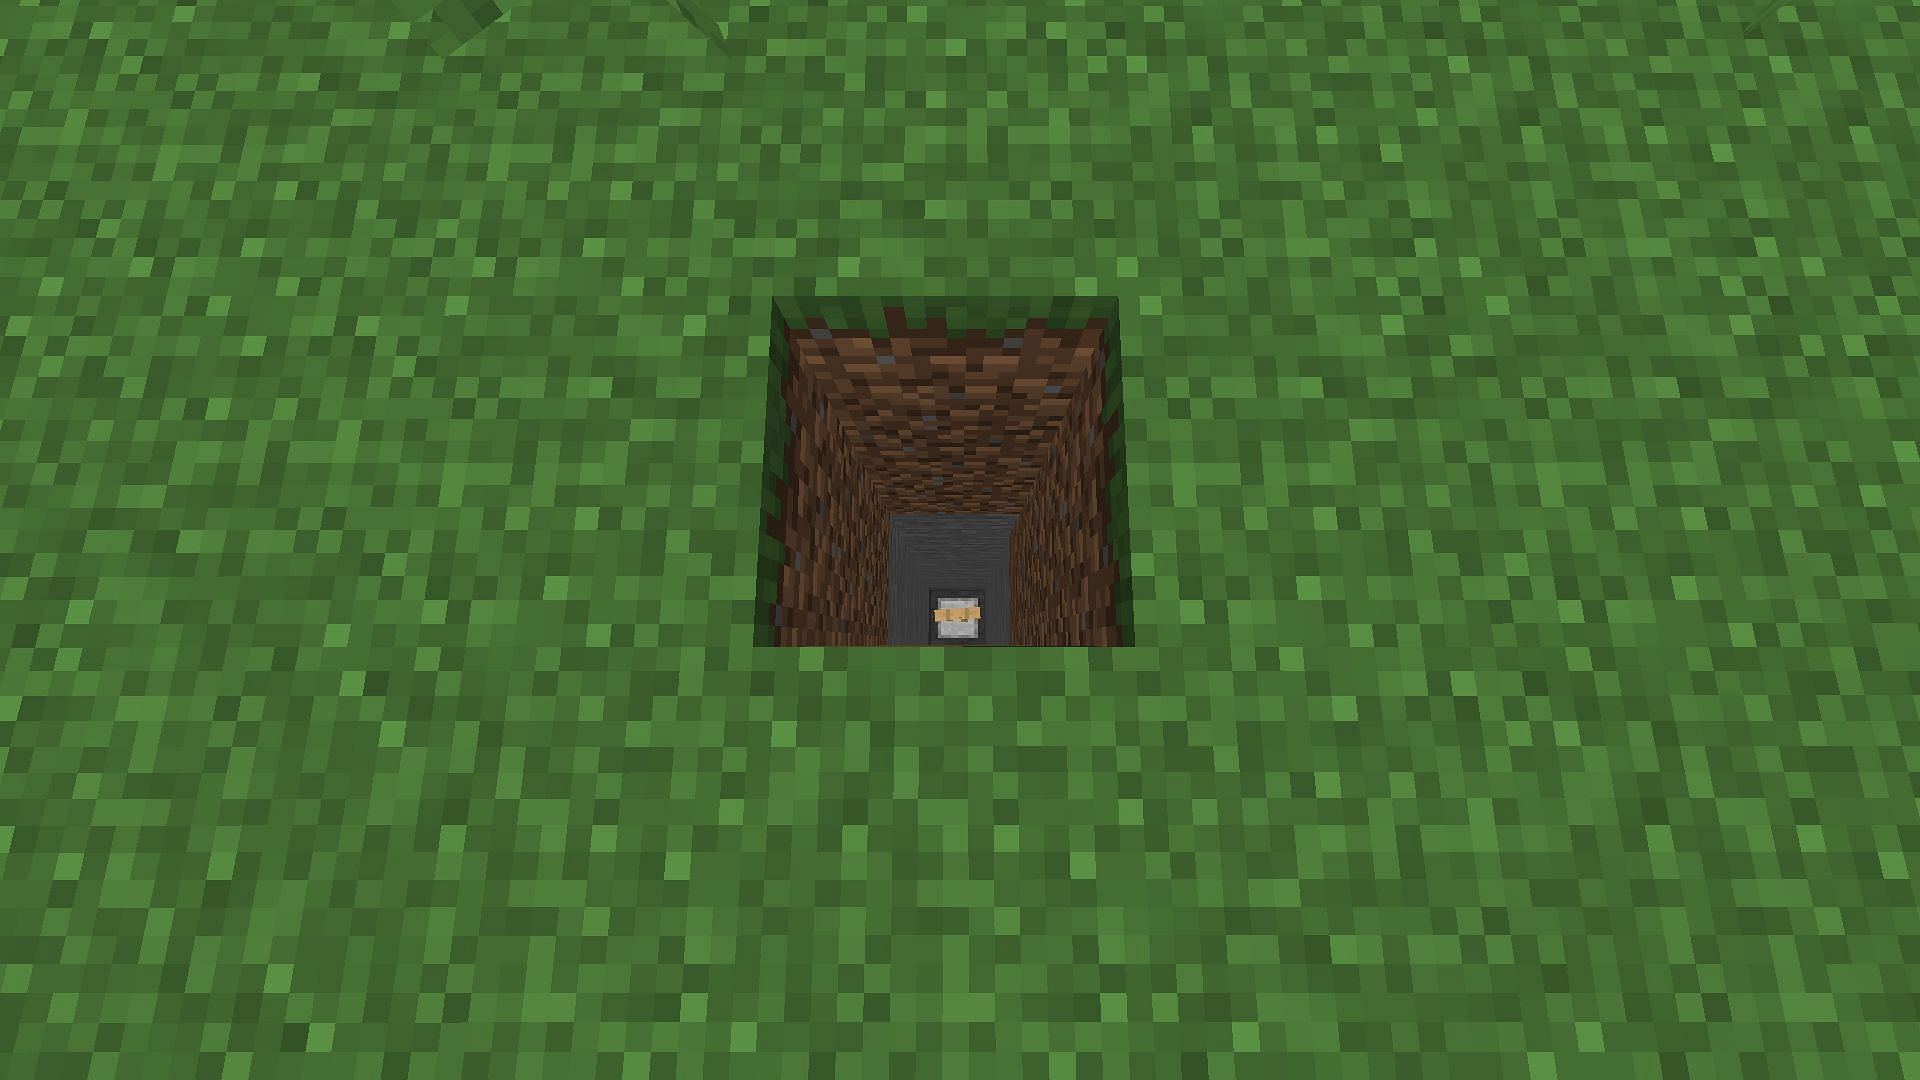 A 1x1 space where the prankster can push their victim (Image via Minecraft)